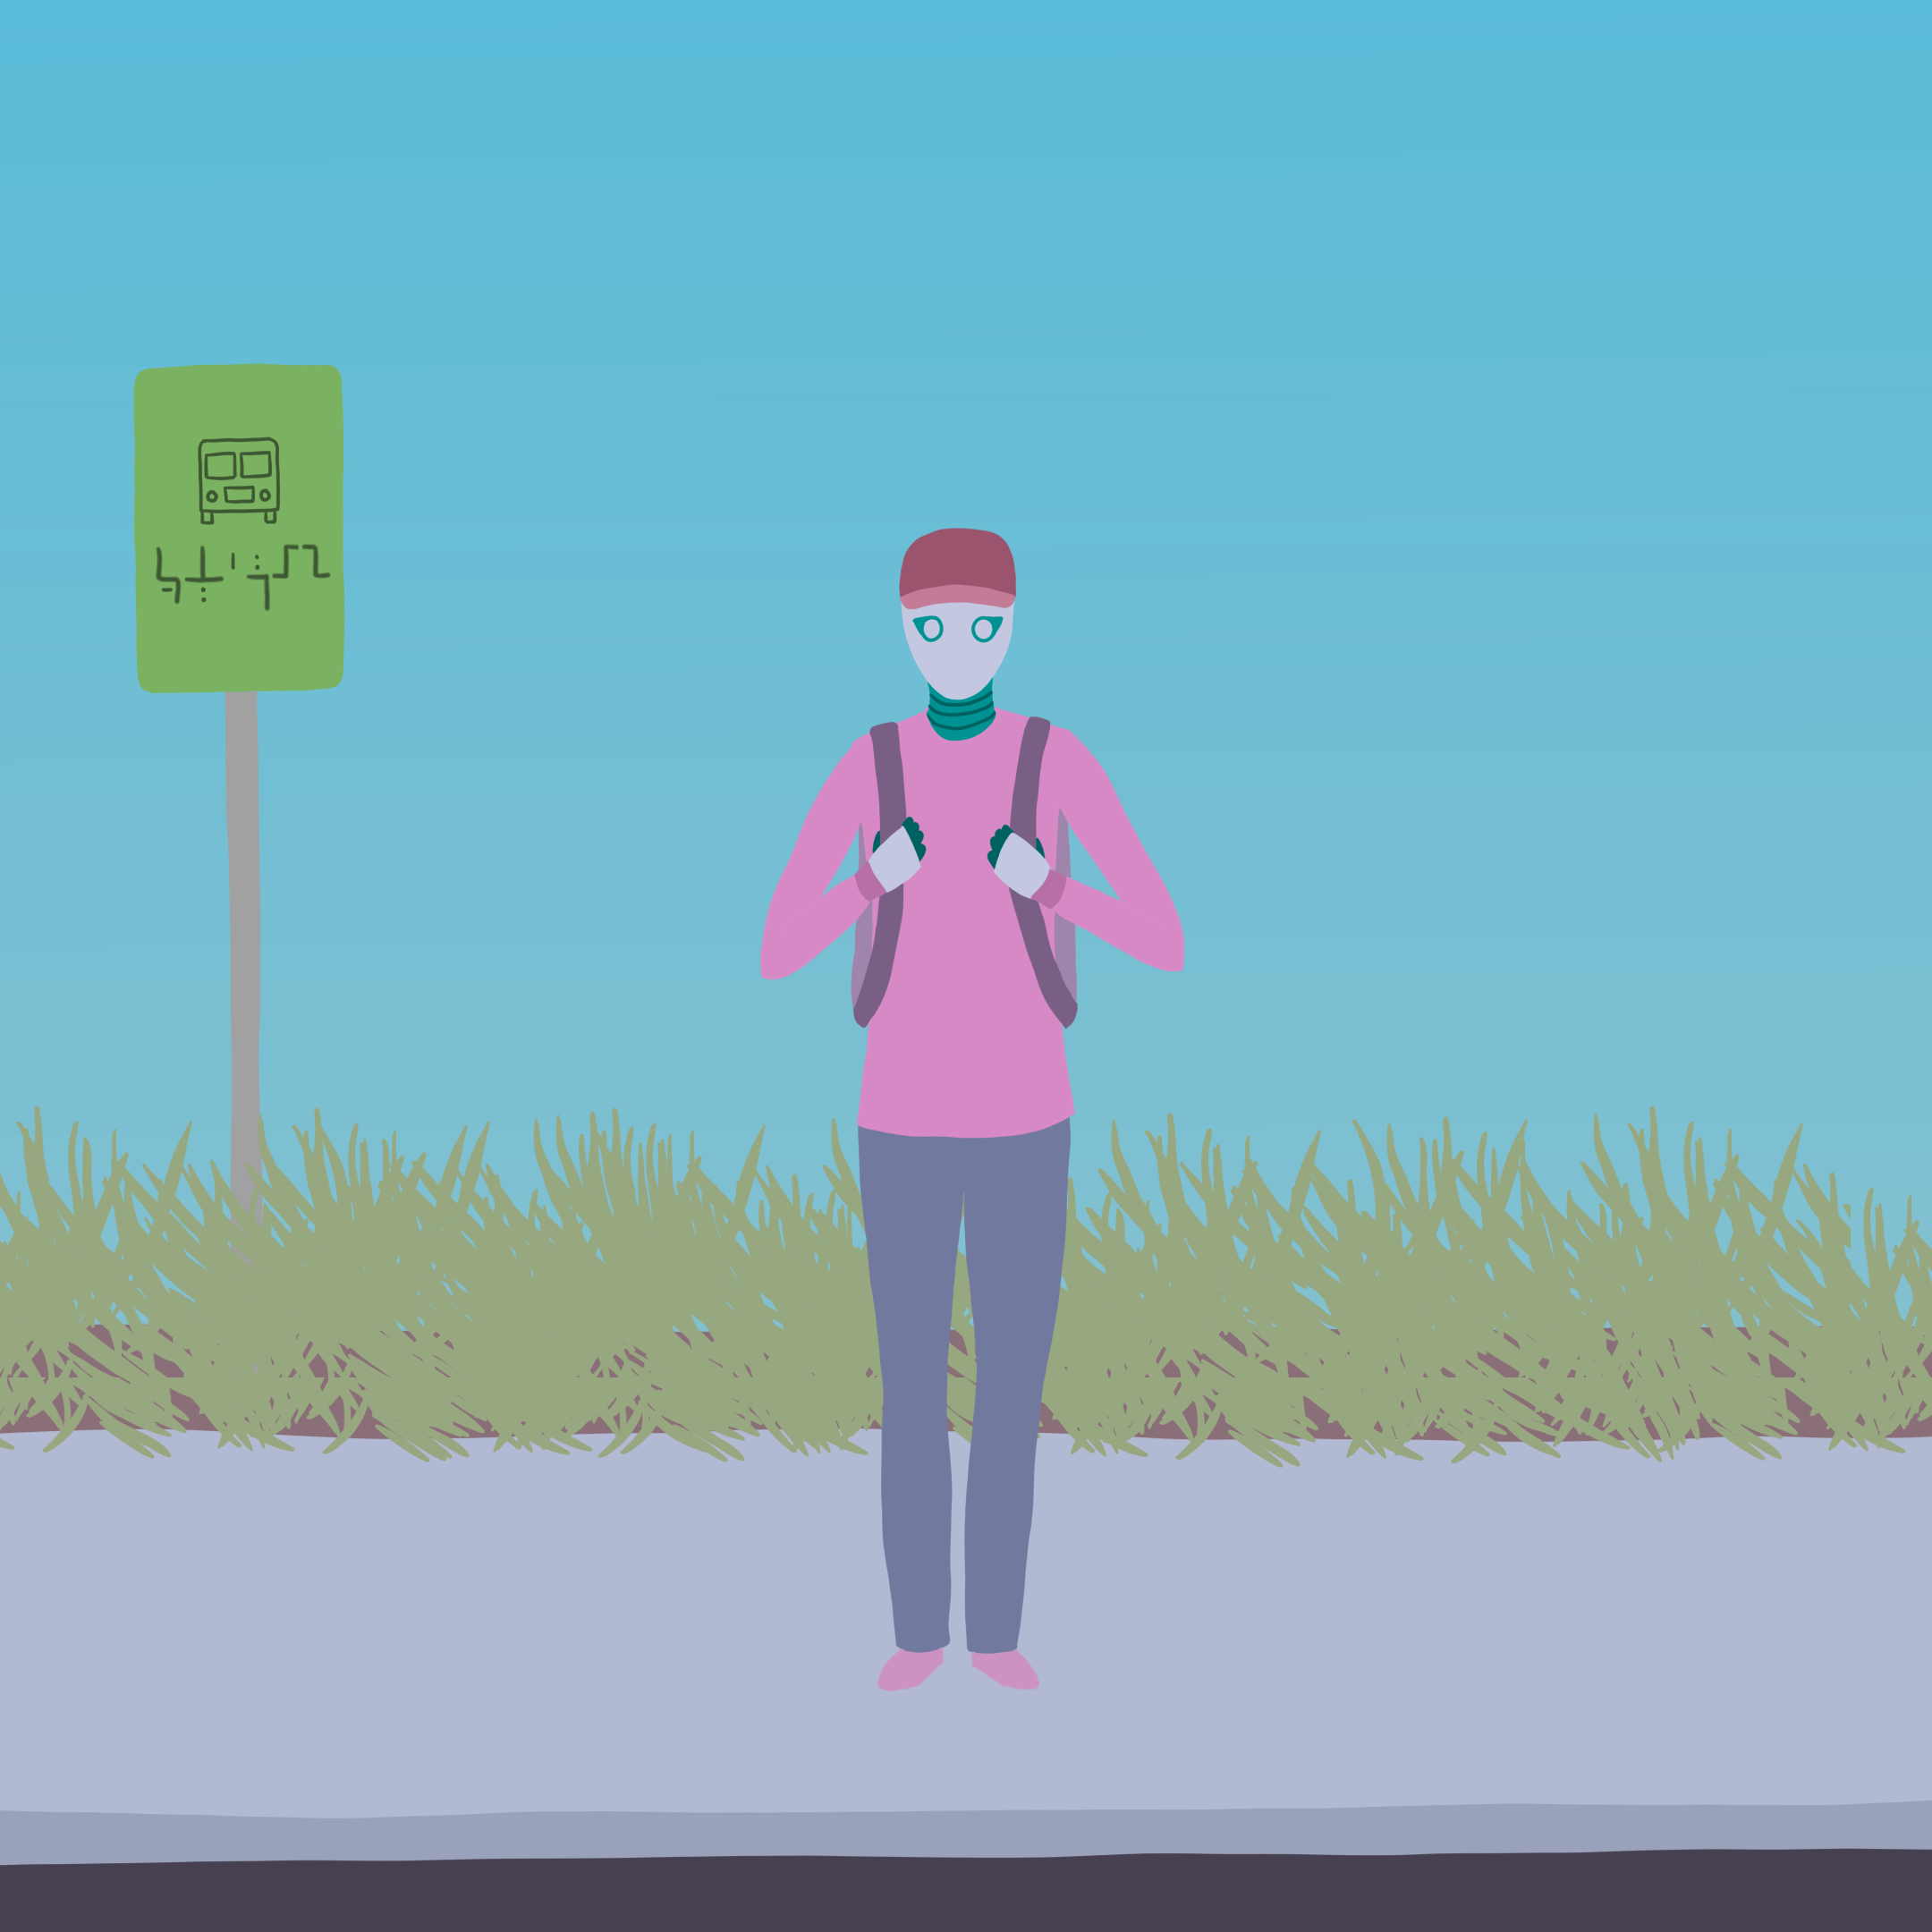 A robot named Rova standing at a bus stop waiting for the bus to come.